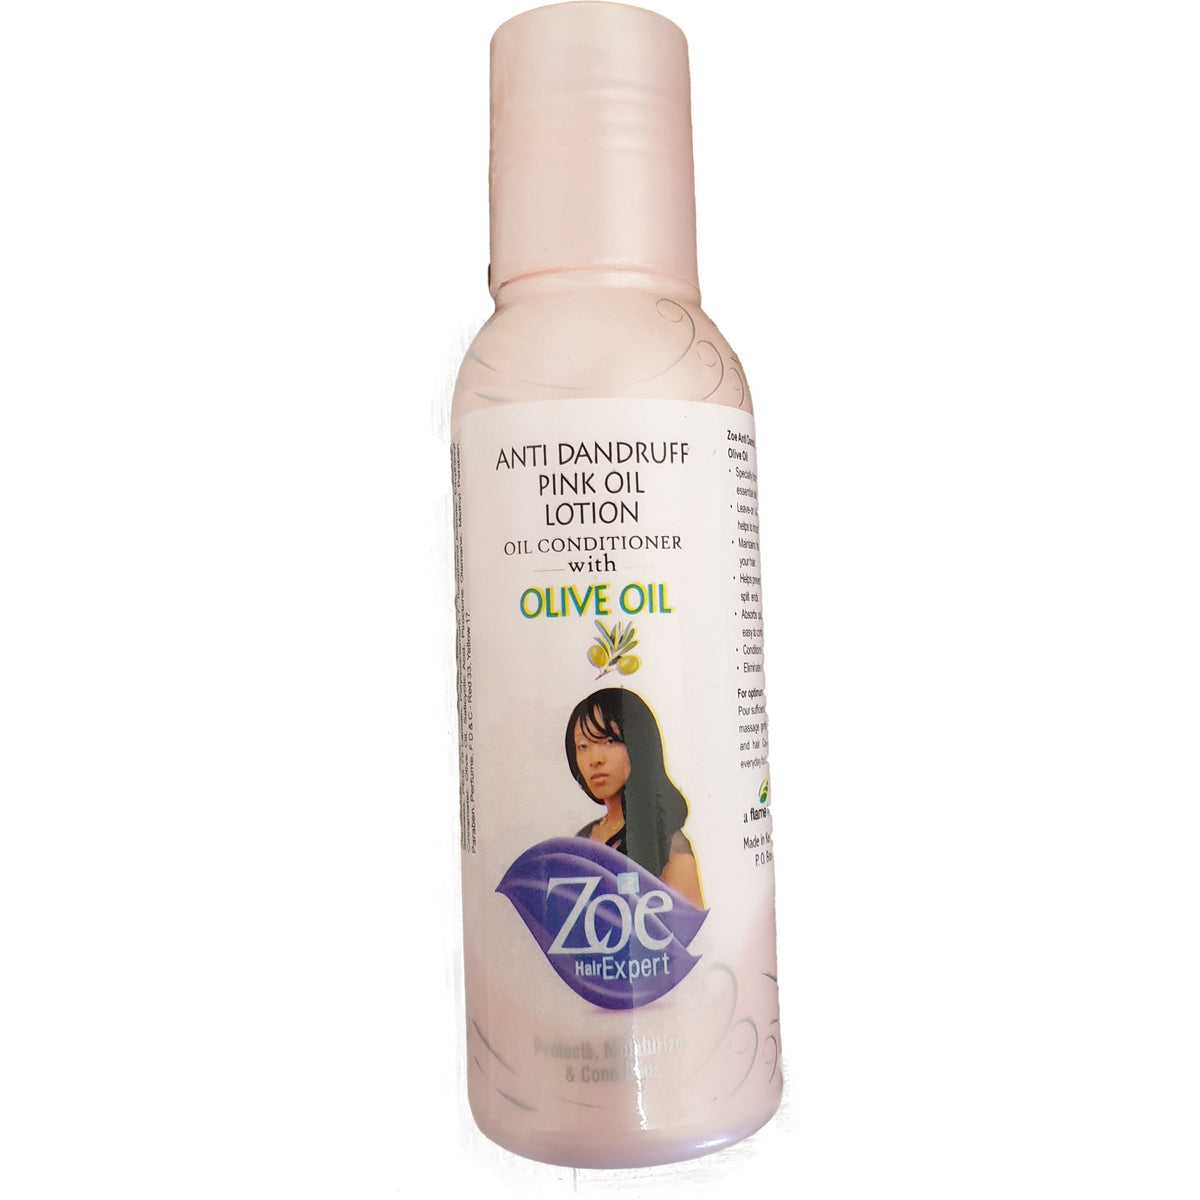 Anit Dandruff Pink Oil Lotion with Olive Oil - Hair Products